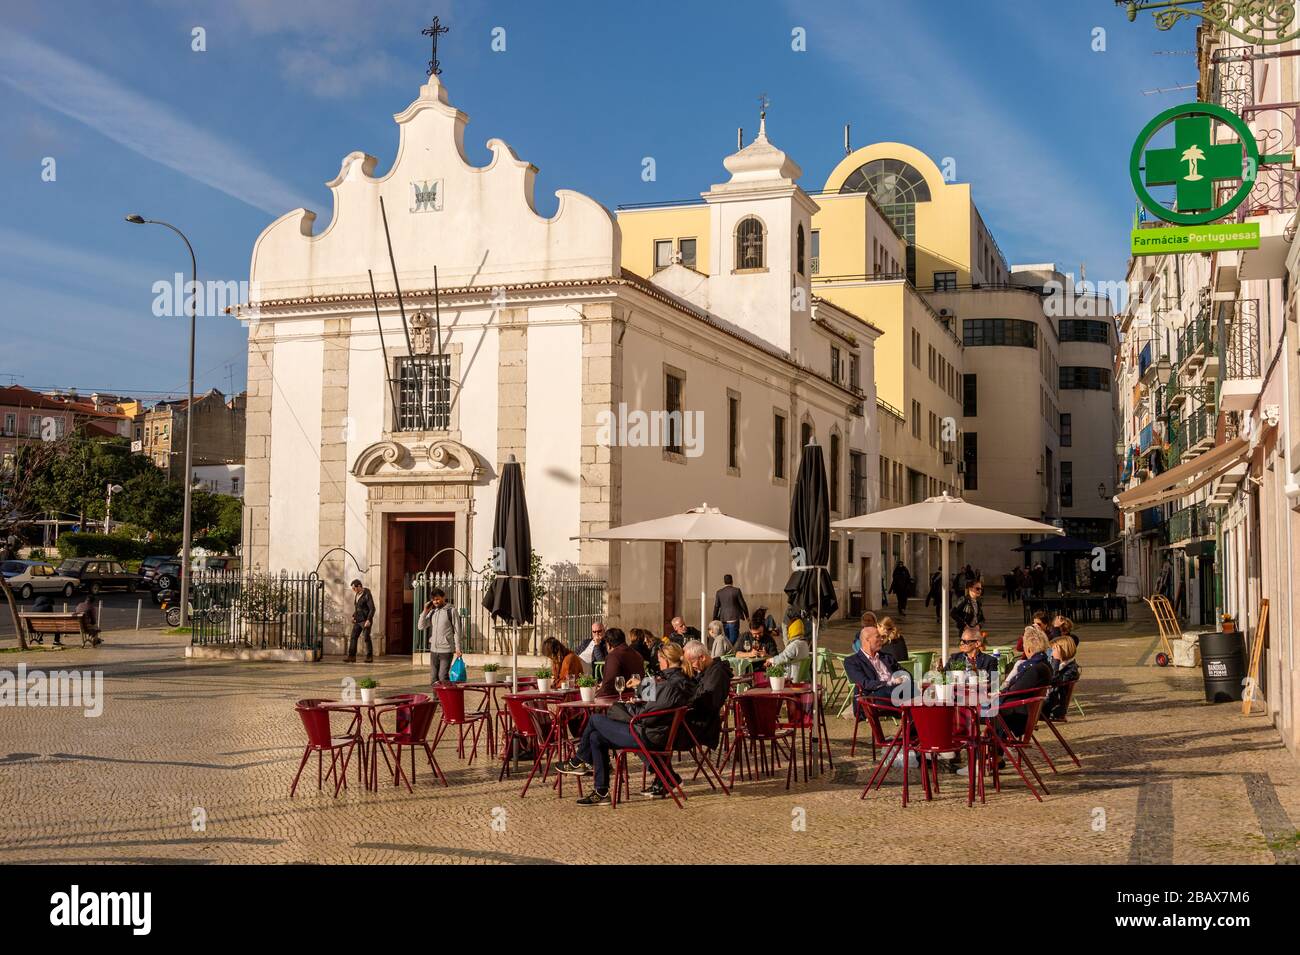 Lisbon, Portugal - 2 March 2020: People having a drink at a cafe terrace at the Praca dom Duarte Stock Photo